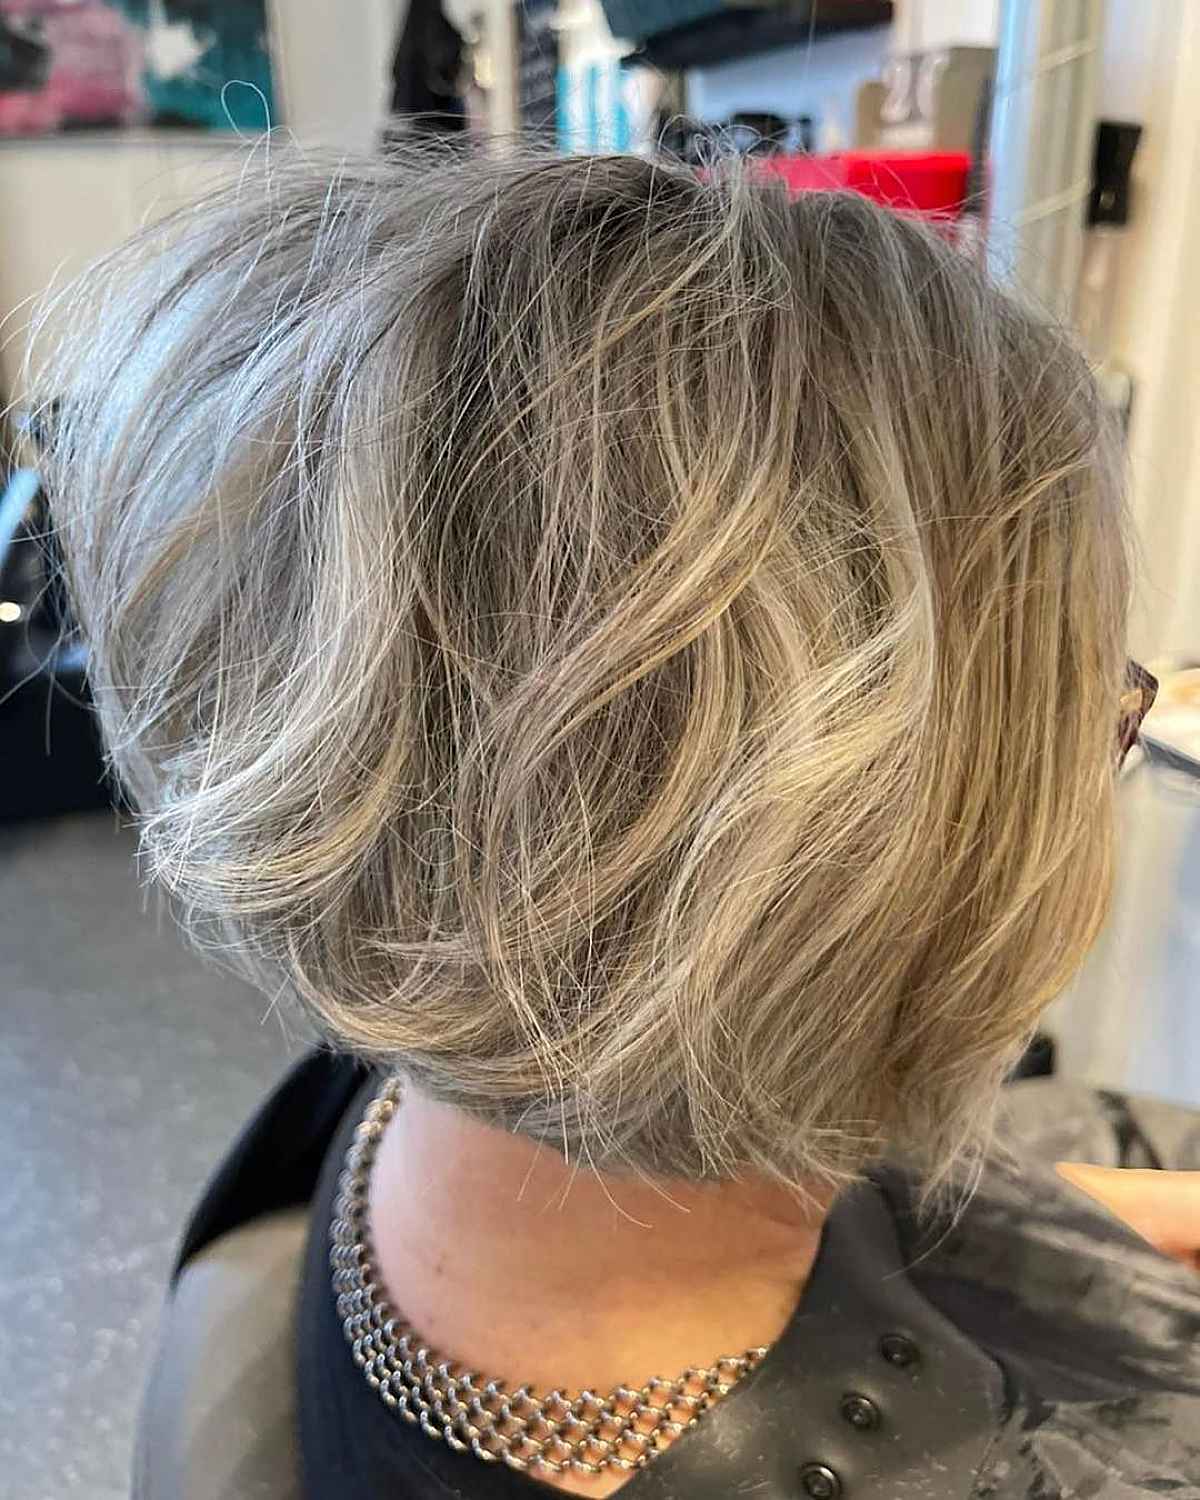 Short Stacked Cut with Messy Waves